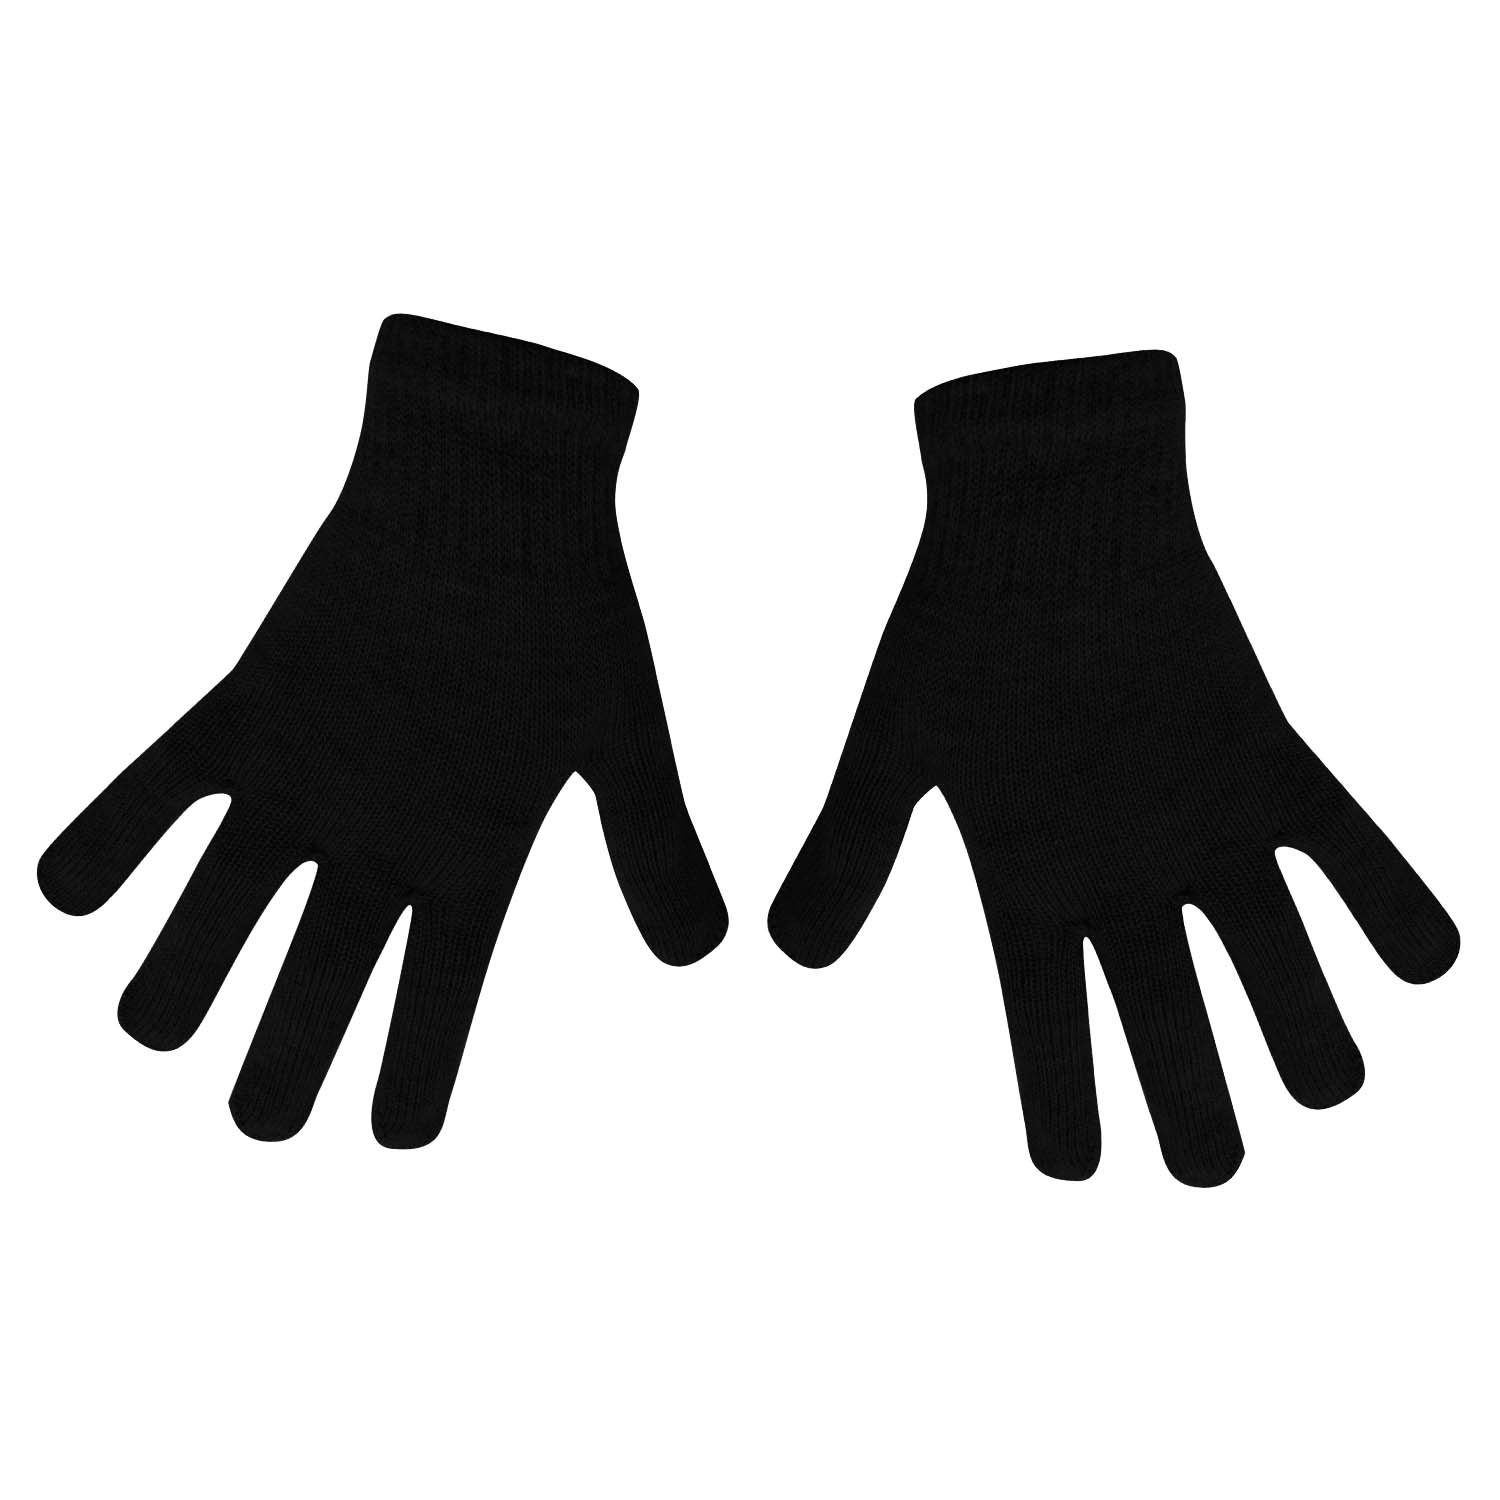 Unisex Bulk Winter Gloves in 5 Assorted Colors - Cold Weather Case of 96 Glove Pairs